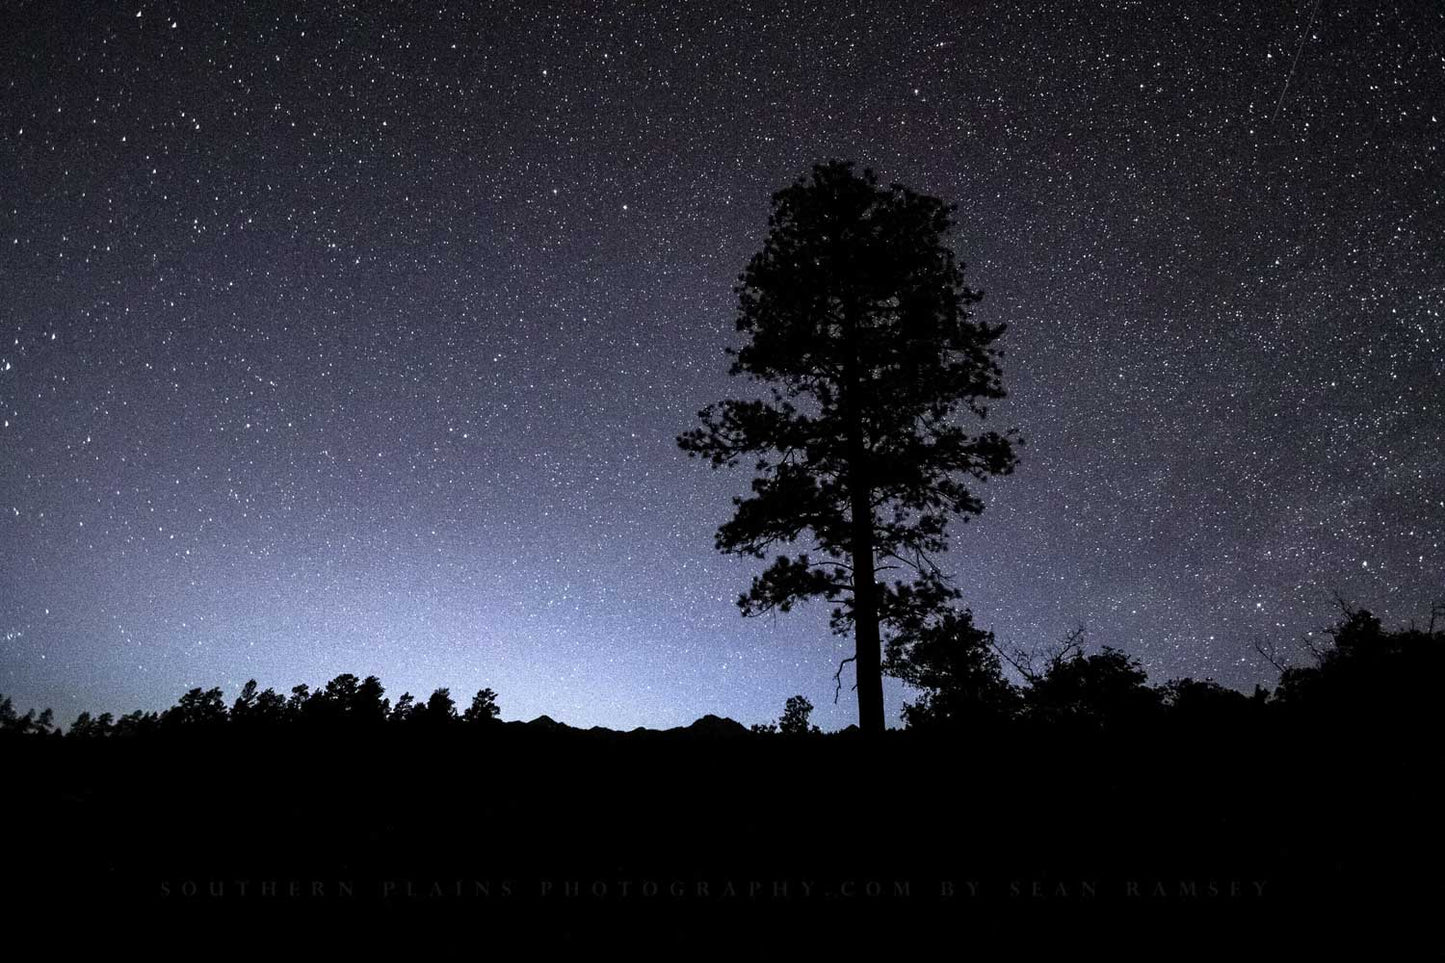 A pine tree silhouette against a starry night sky in the Rocky Mountains of Colorado by Sean Ramsey of Southern Plains Photography.